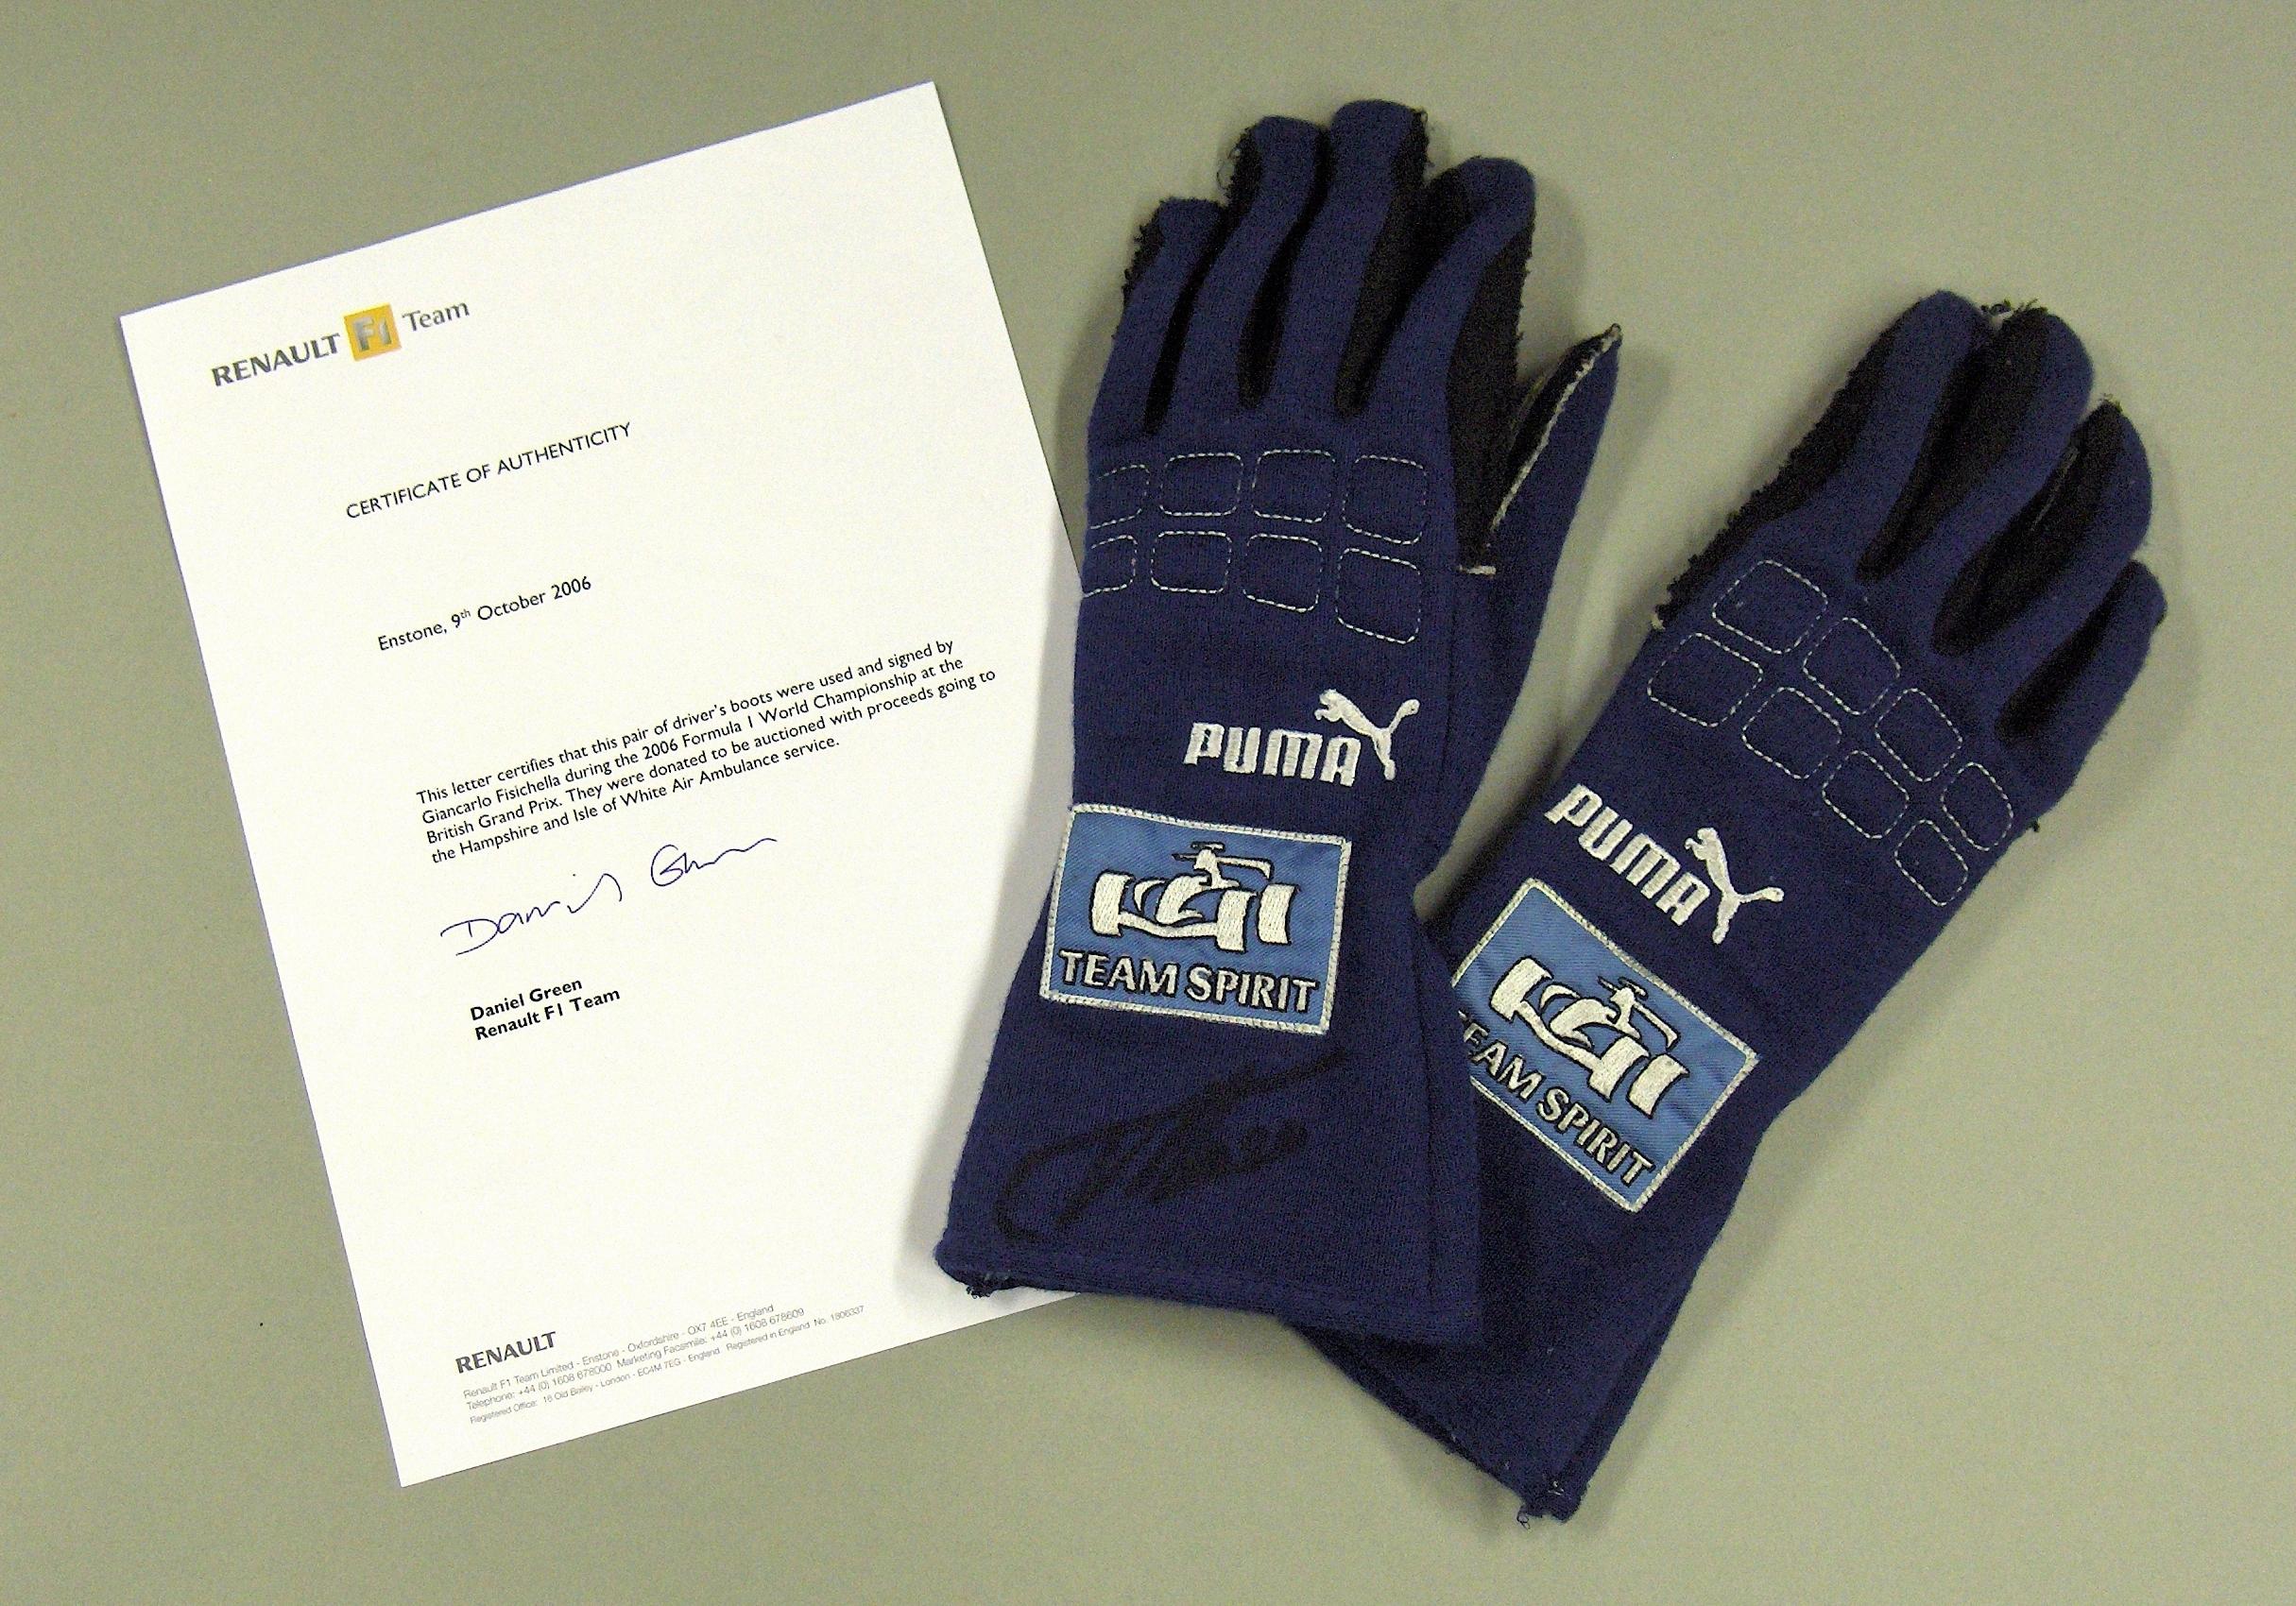 Bonhams Cars A Pair Of Gloves Signed By And Worn By Fernando Alonso During The 2006 British